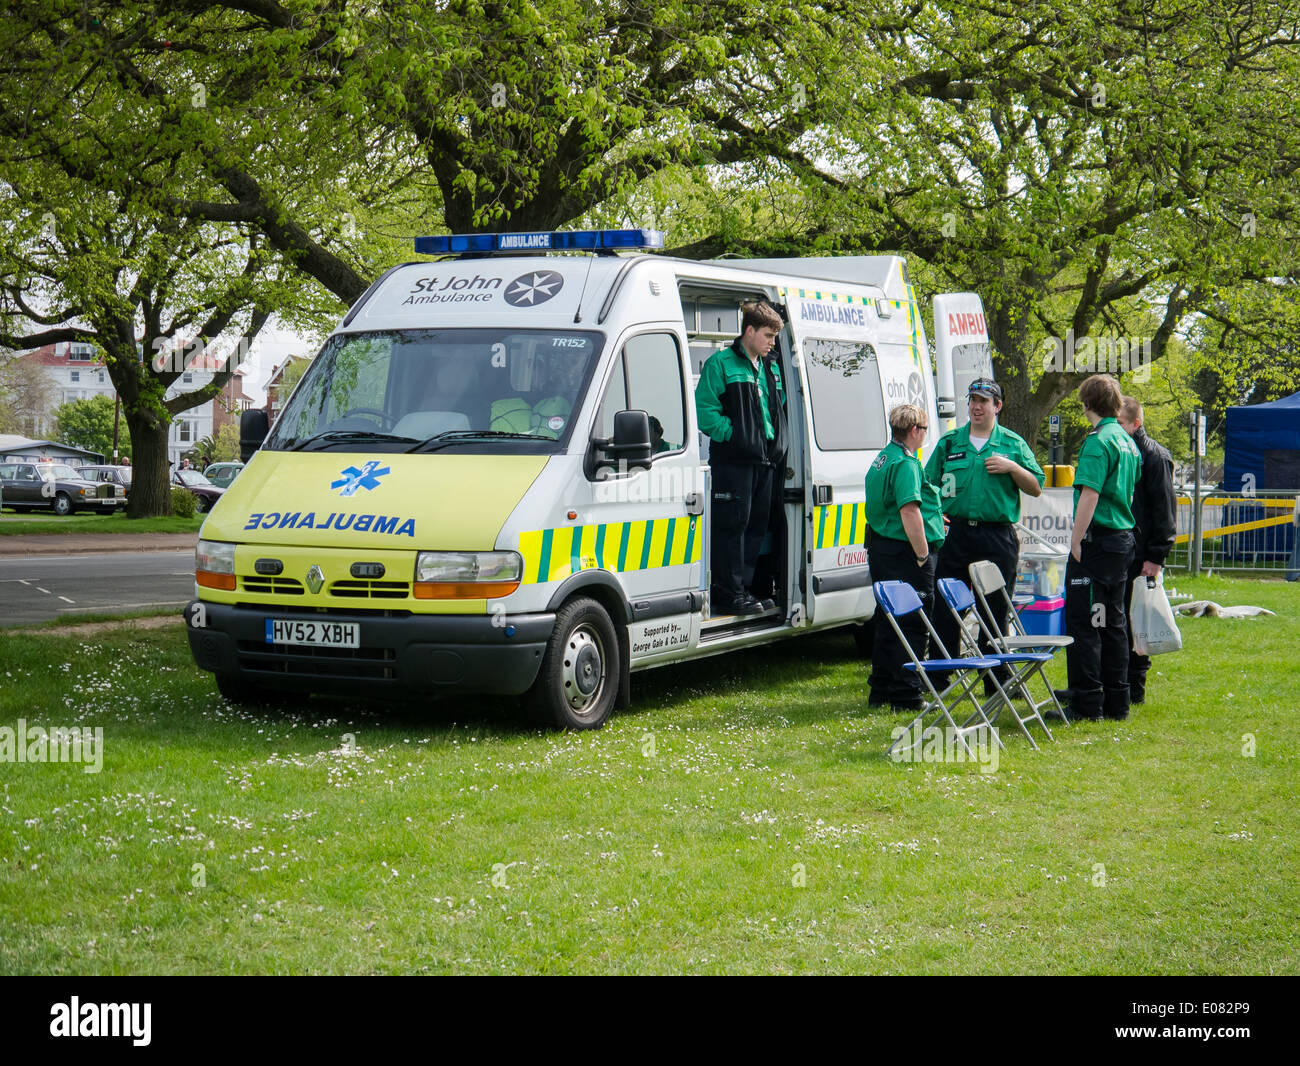 Members of St. John Ambulance providing emergency first aid cover from an ambulance at a community event. Stock Photo